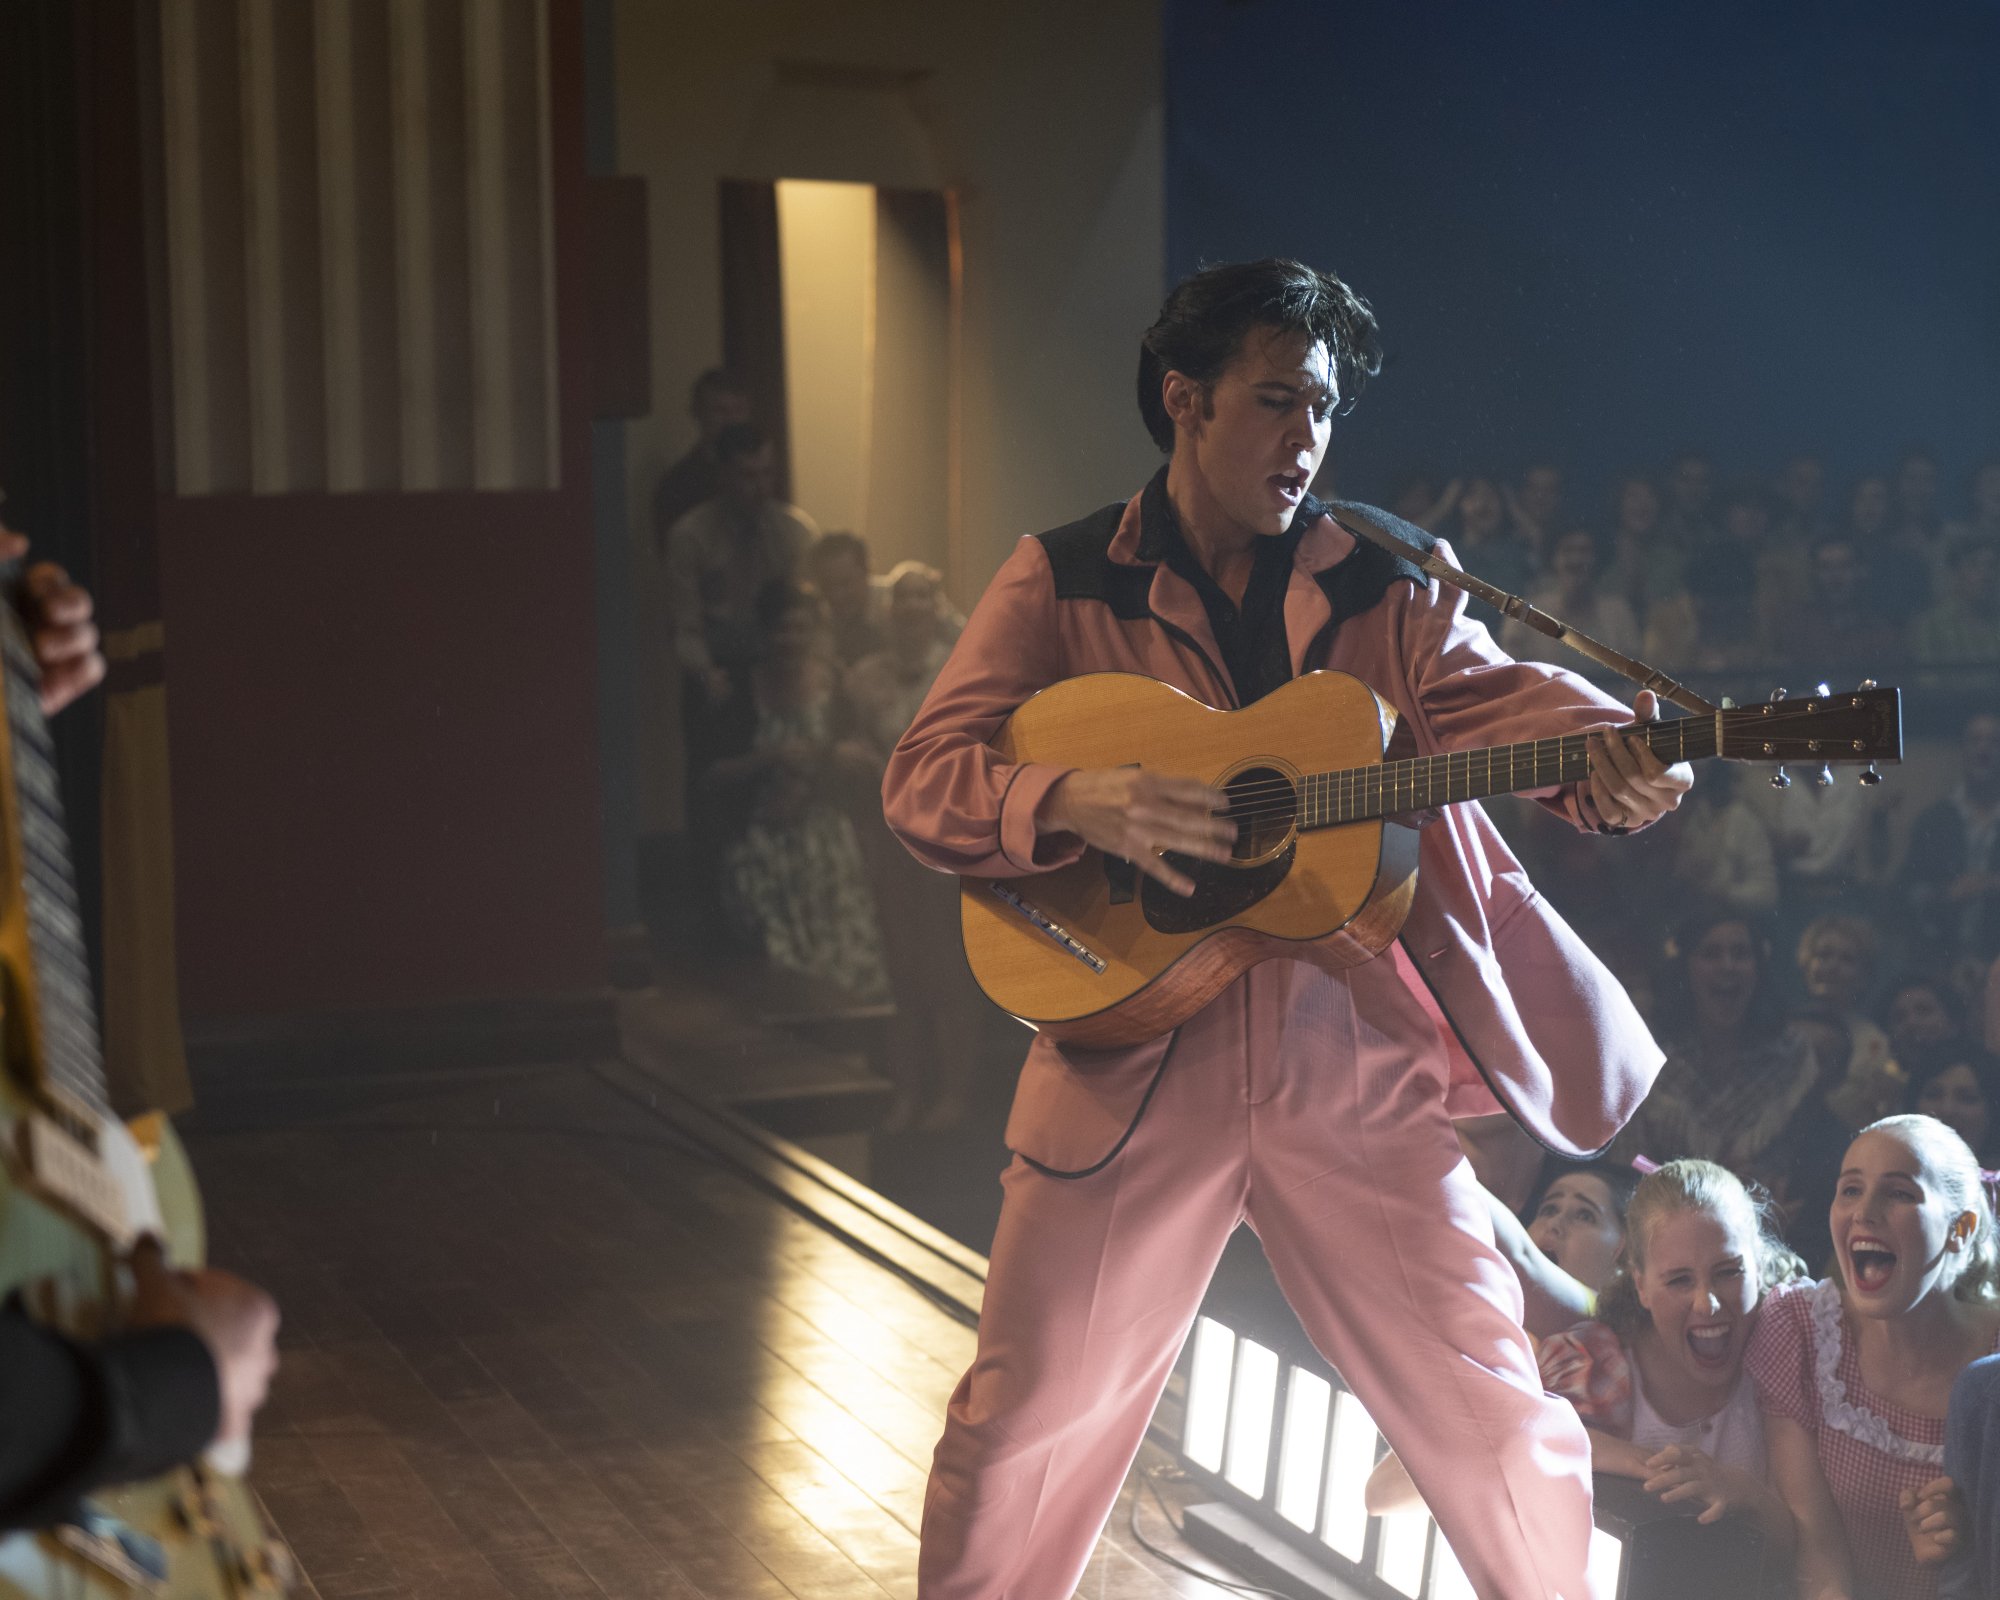 'Elvis' trailer Austin Butler as Elvis Presley wearing pink and playing the guitar on stage